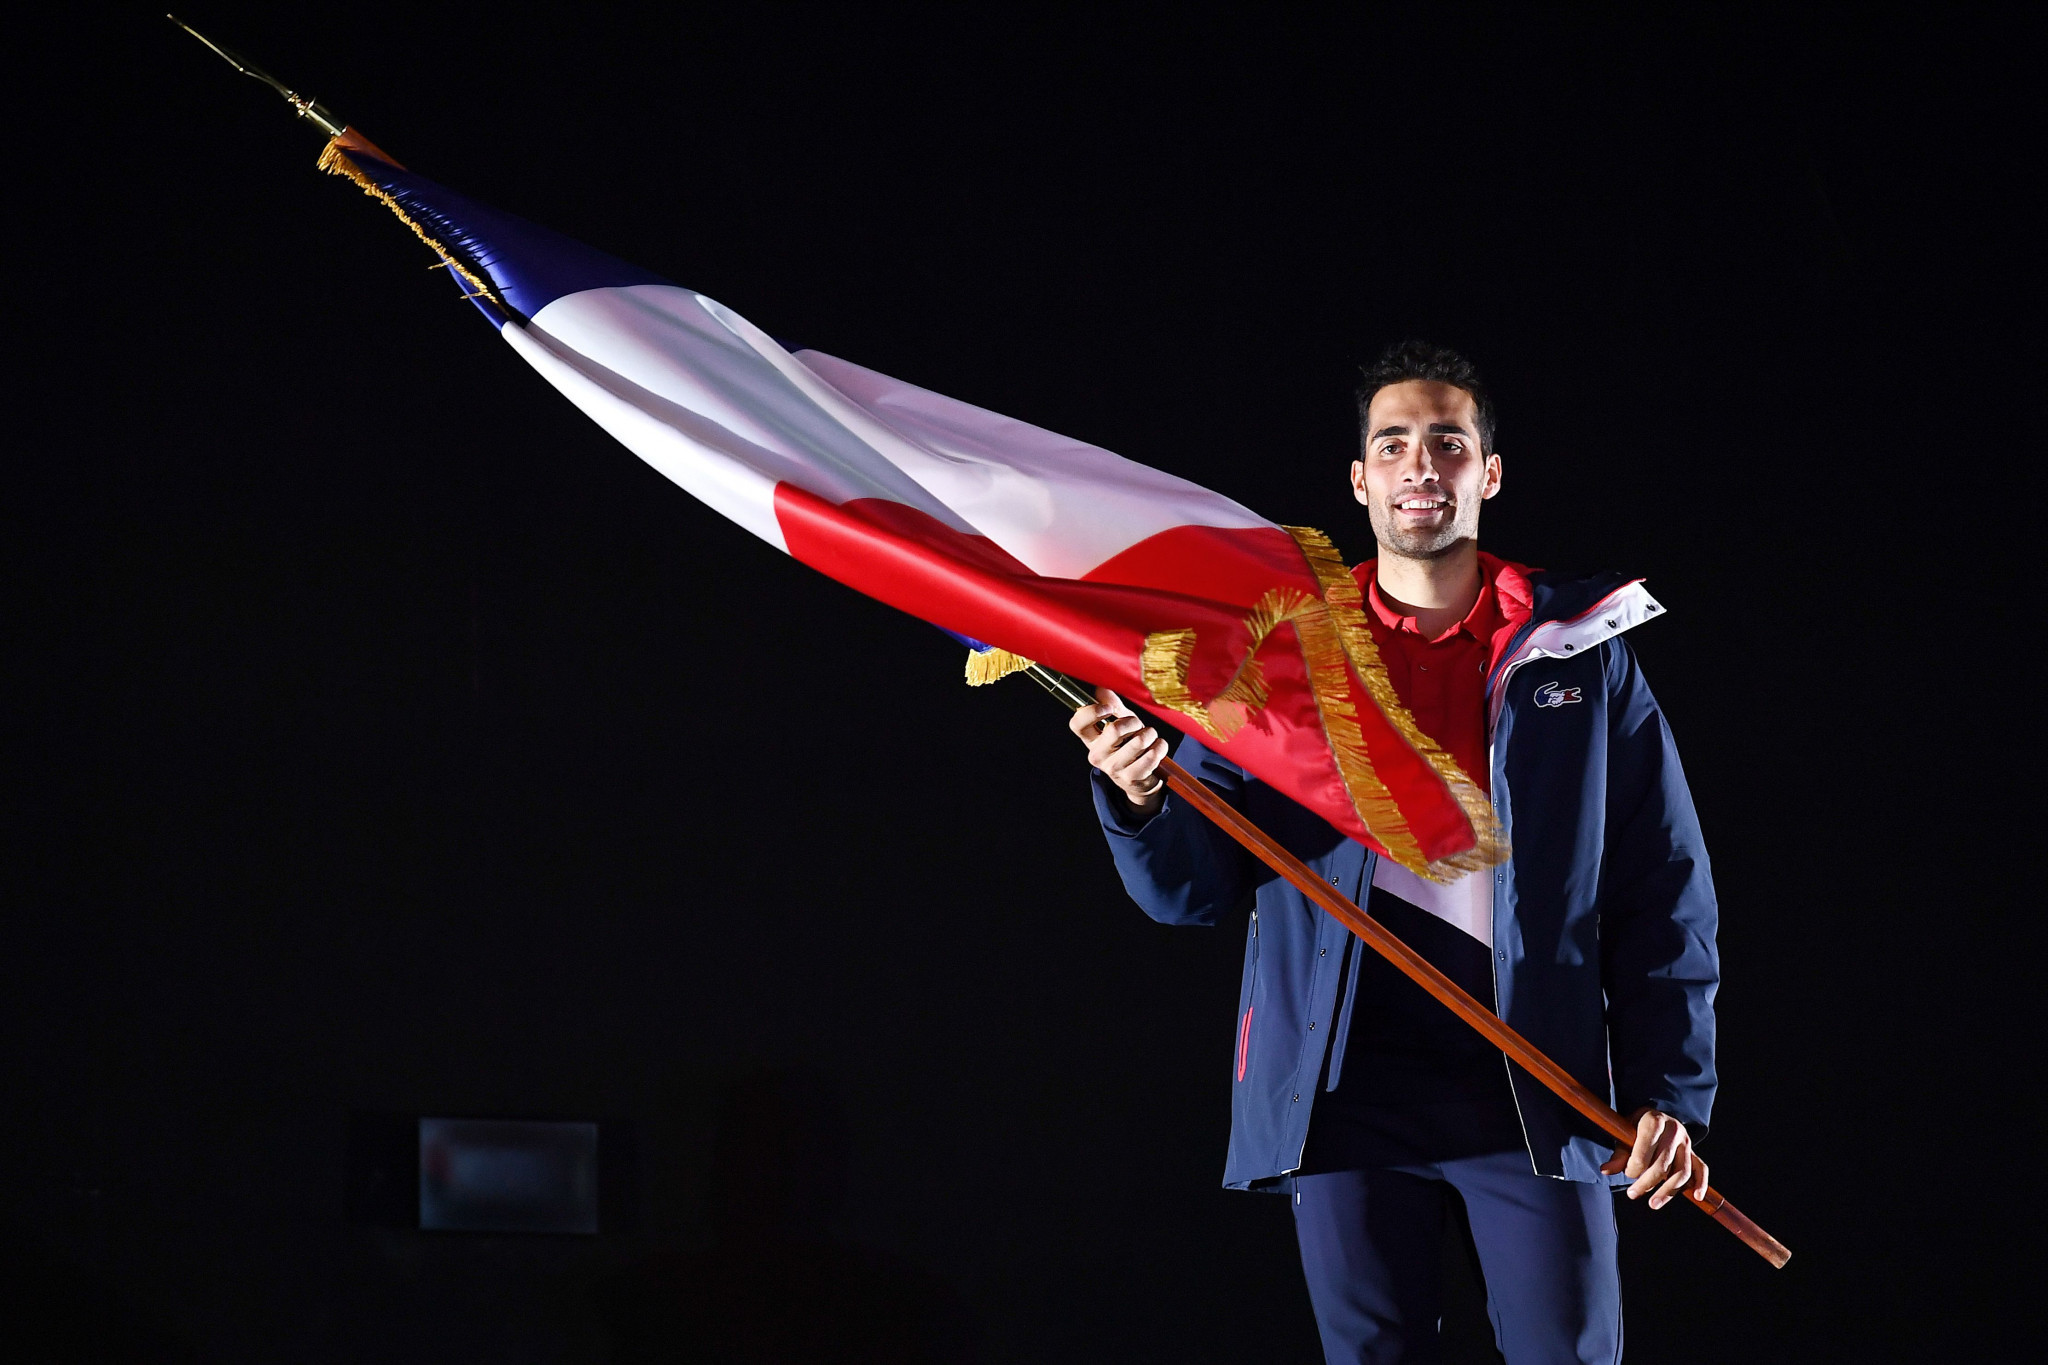 Martin Fourcade was confirmed as the French flagbearer for Pyeongchang 2018 earlier this year ©Getty Images